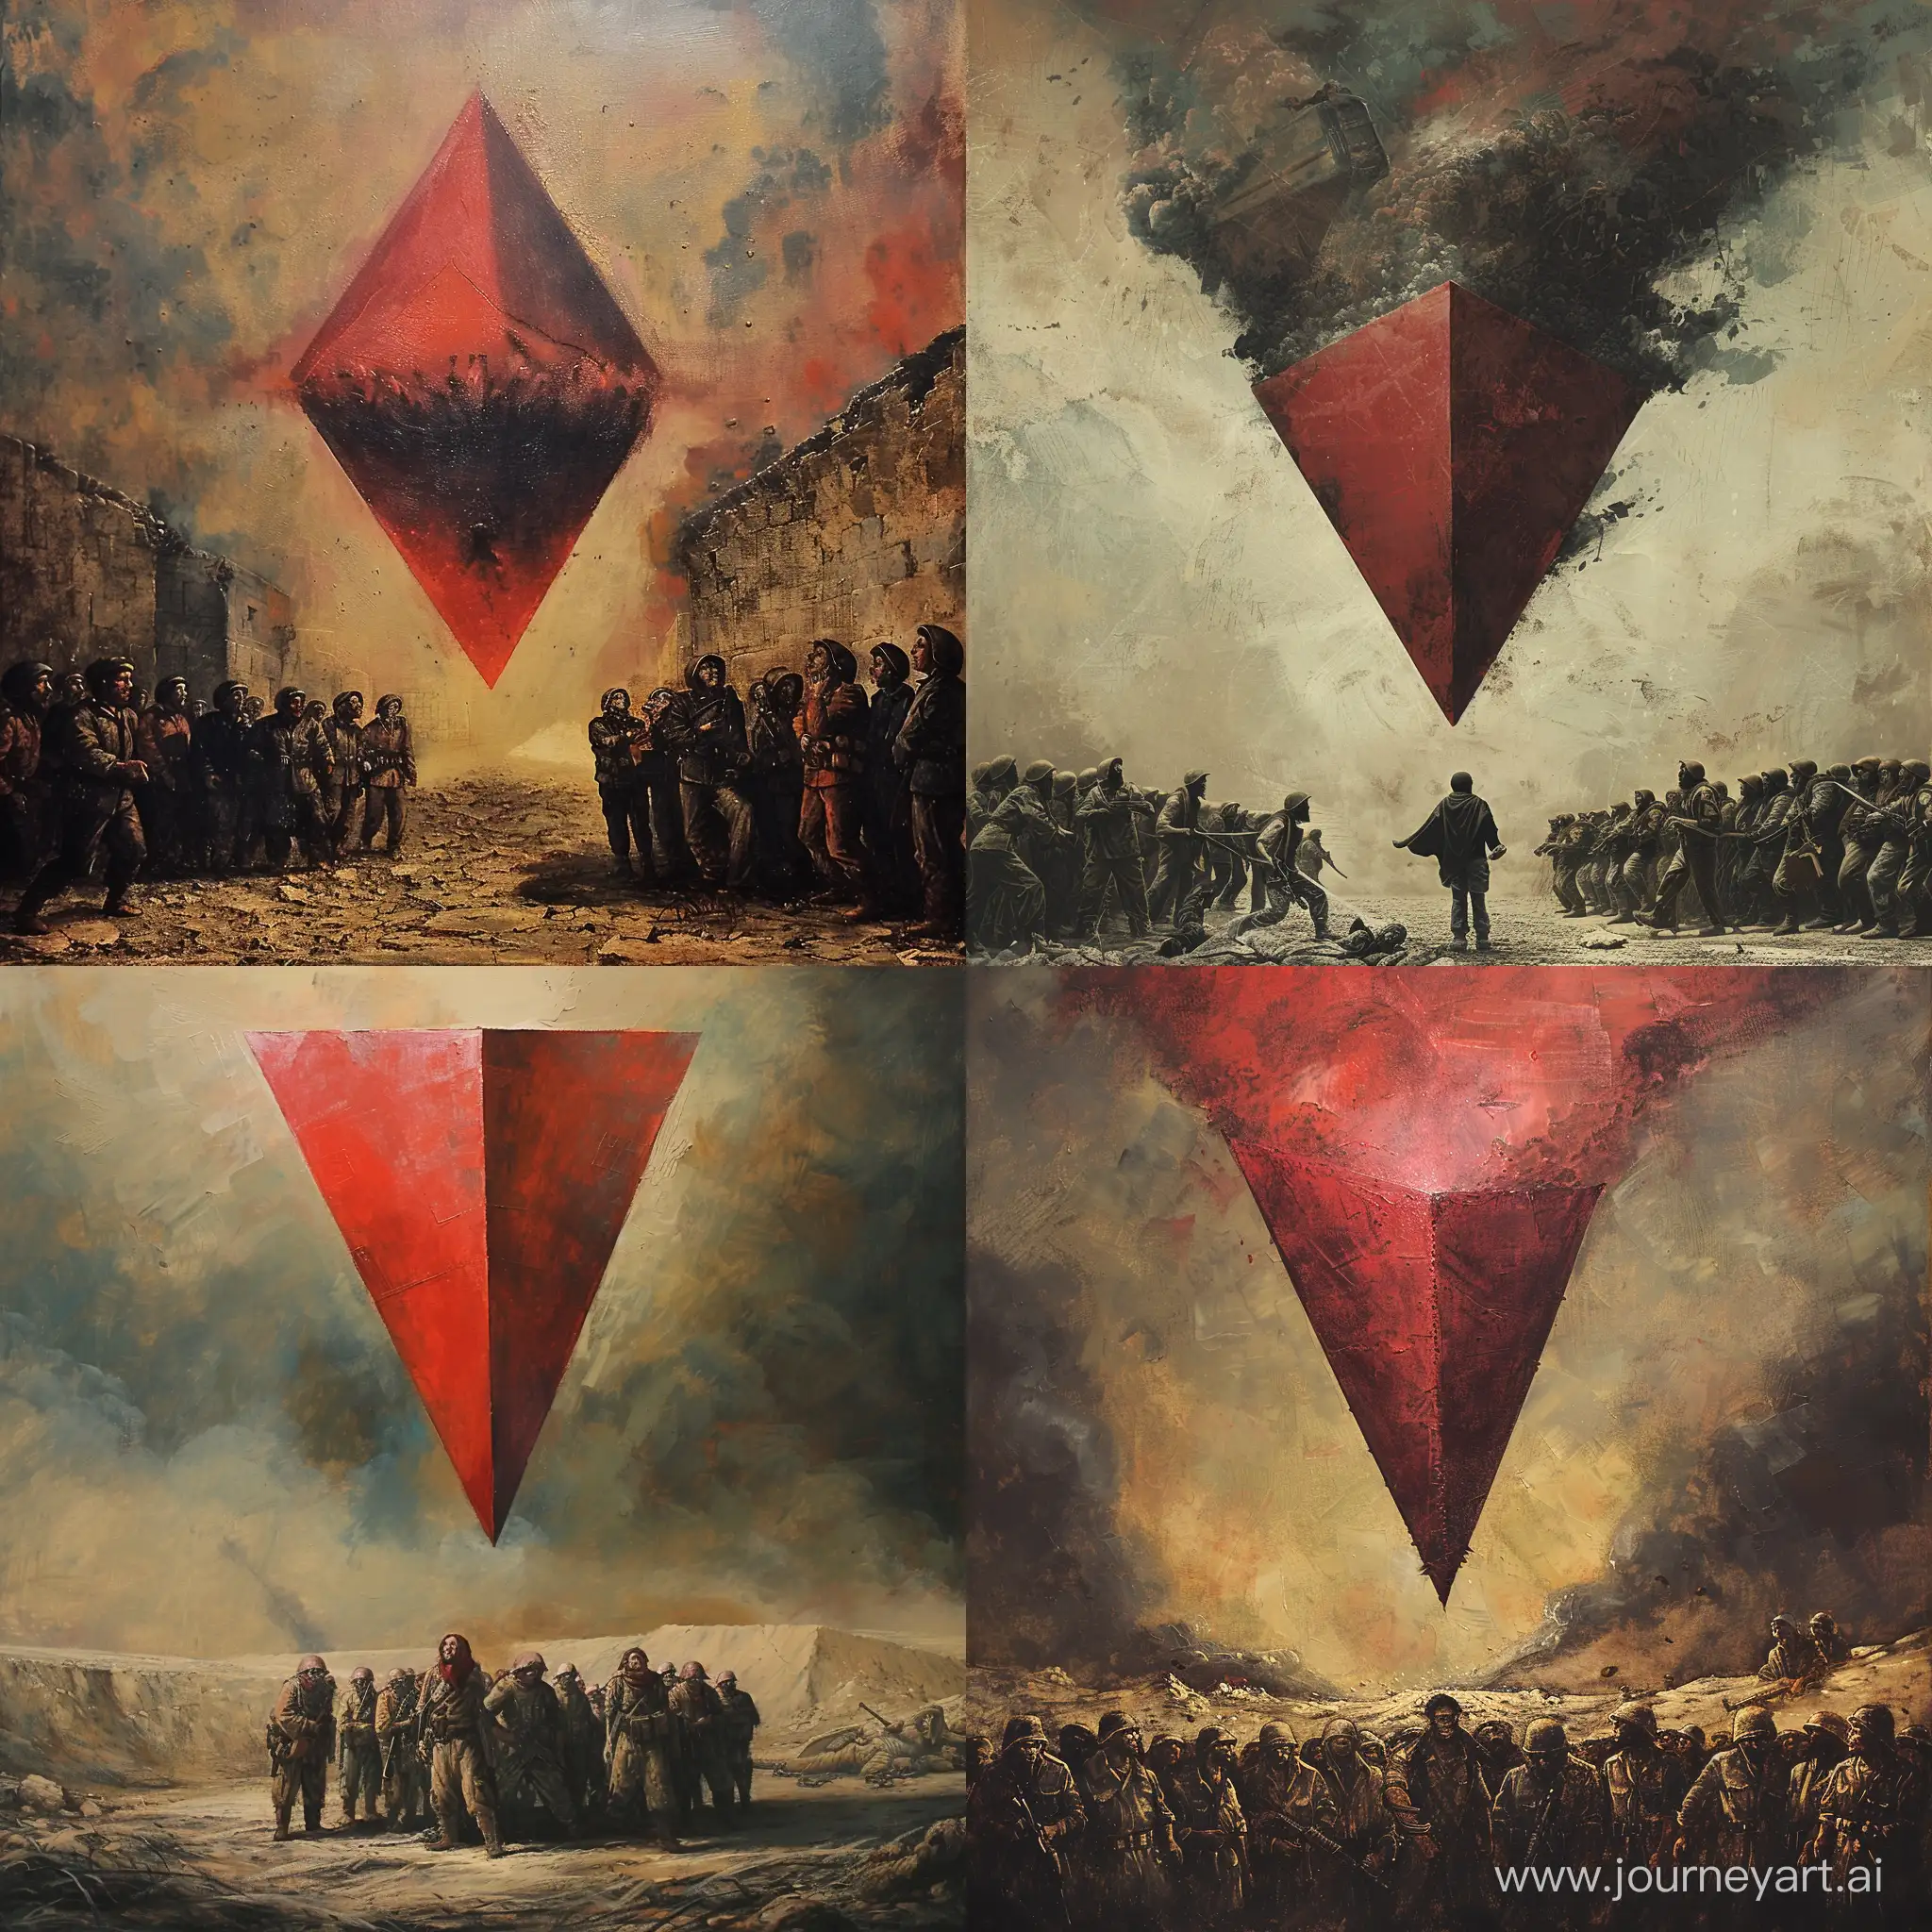 An artistic painting showing the descent of a large red triangle from the sky, symbolizing Palestinian resistance and expressing victory over the oppressors. Its head is down and its base is up. The tip of the triangle is planted in the ground.
He is surrounded by a group of evil soldiers who look at him in a state of panic and fear.